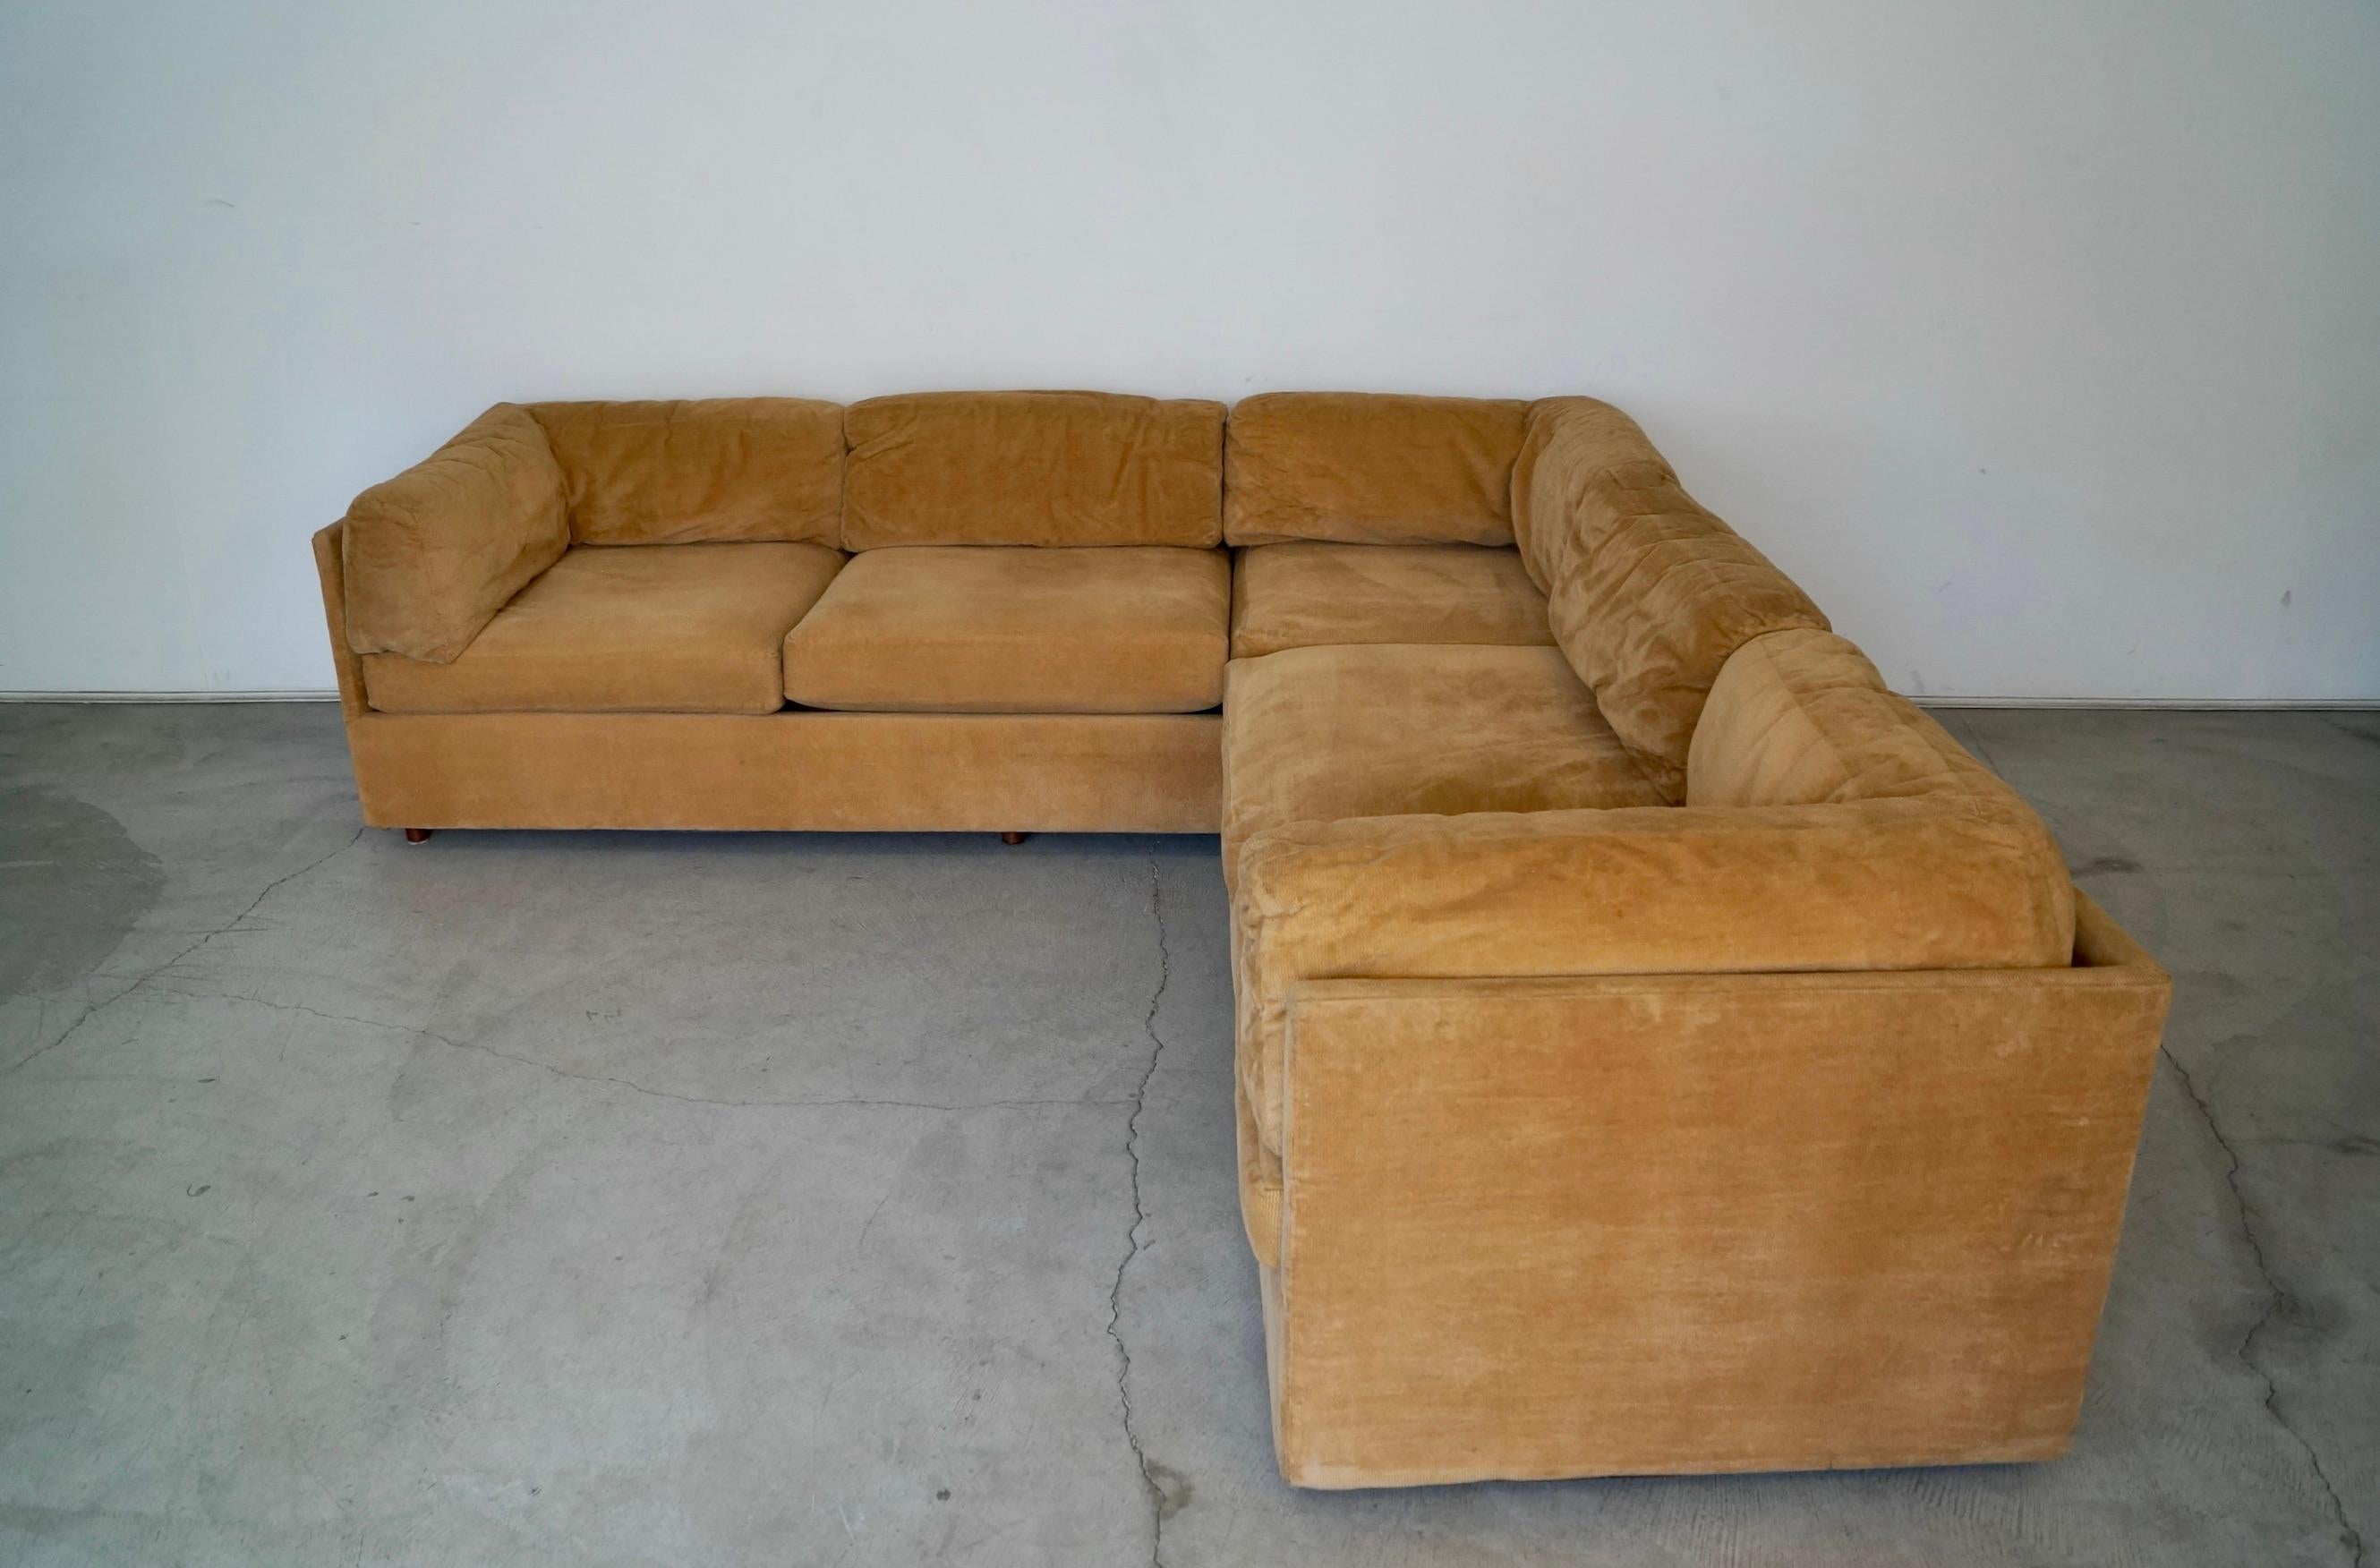 Vintage original 1970s Mid-Century Modern lounge couch for sale. It comes with three pieces, and is a sectional with one long sofa and modular chair pieces. It's really solid and well made, and has springs on the seat frame. It has back cushions